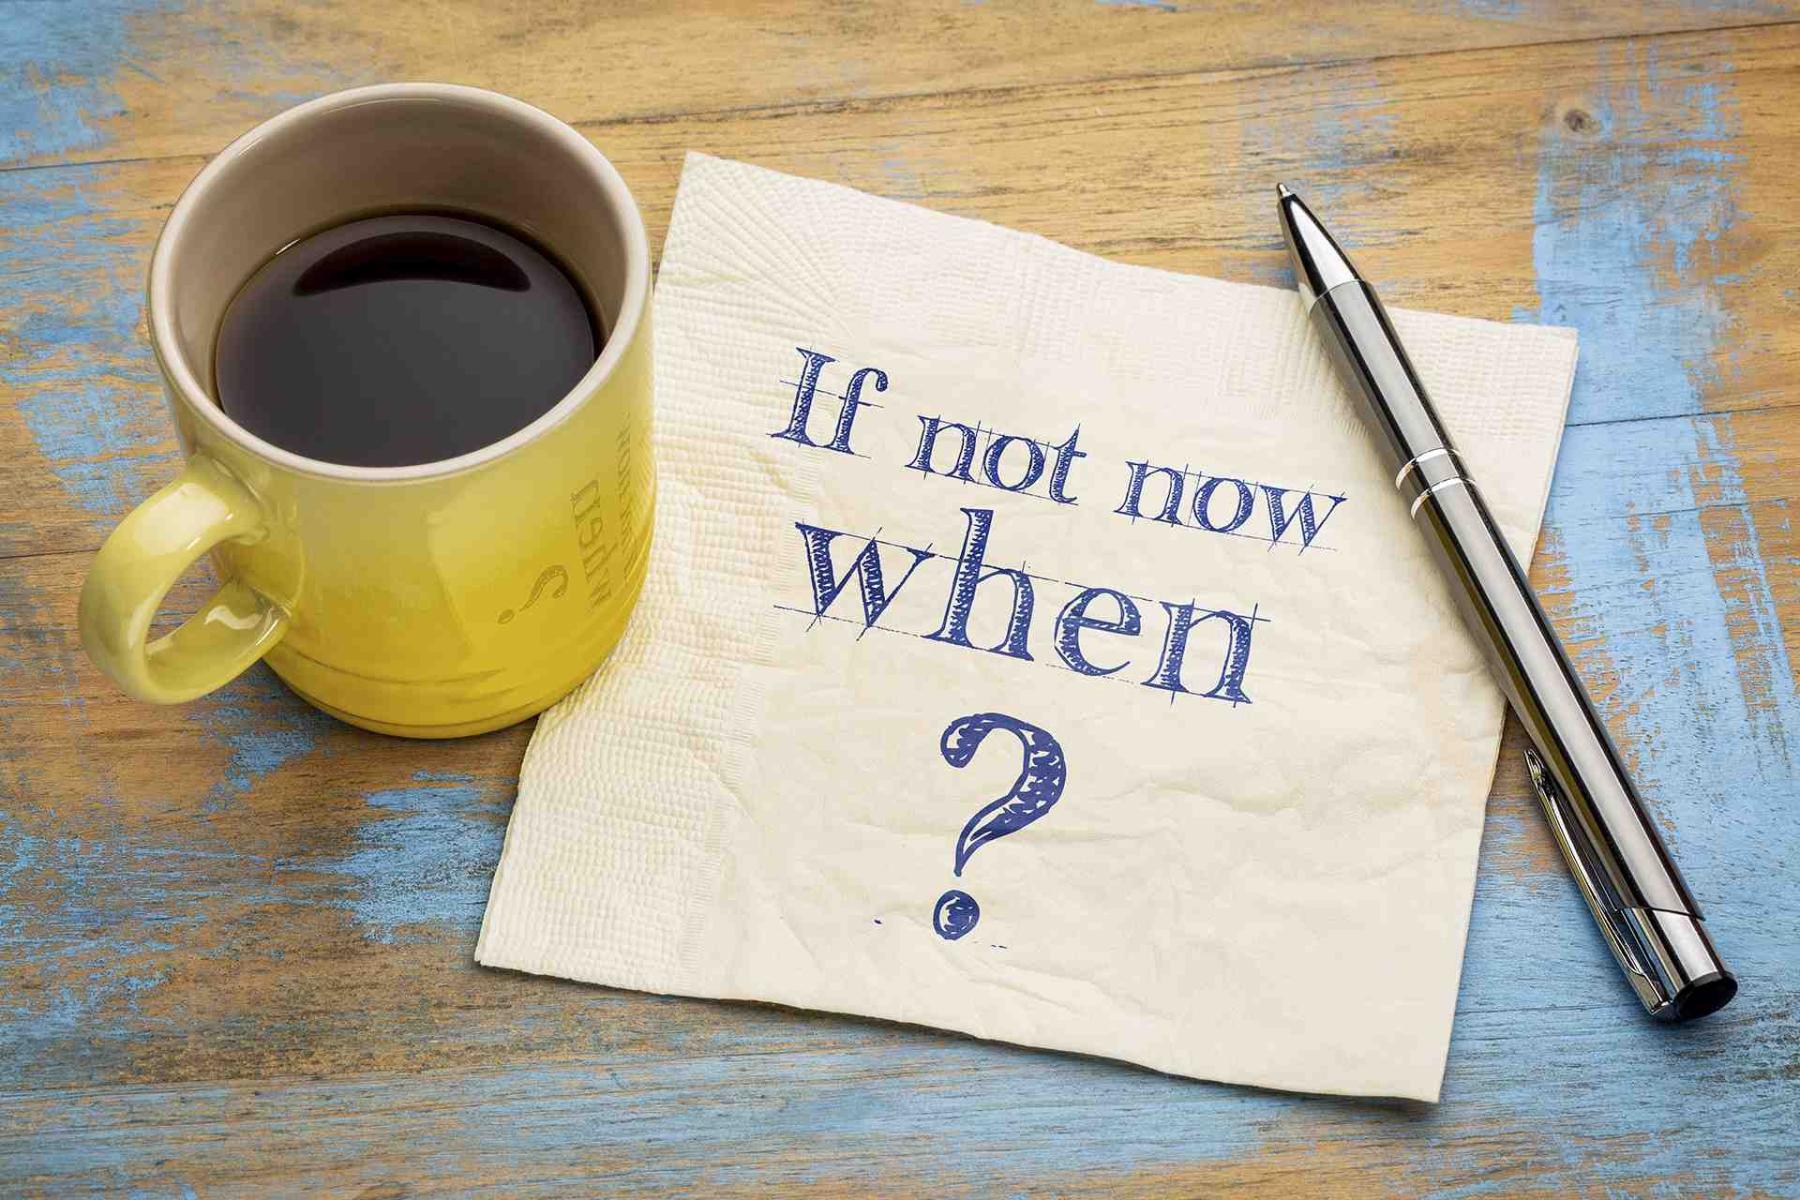 If not now when? written on a napkin next to a coffee cup